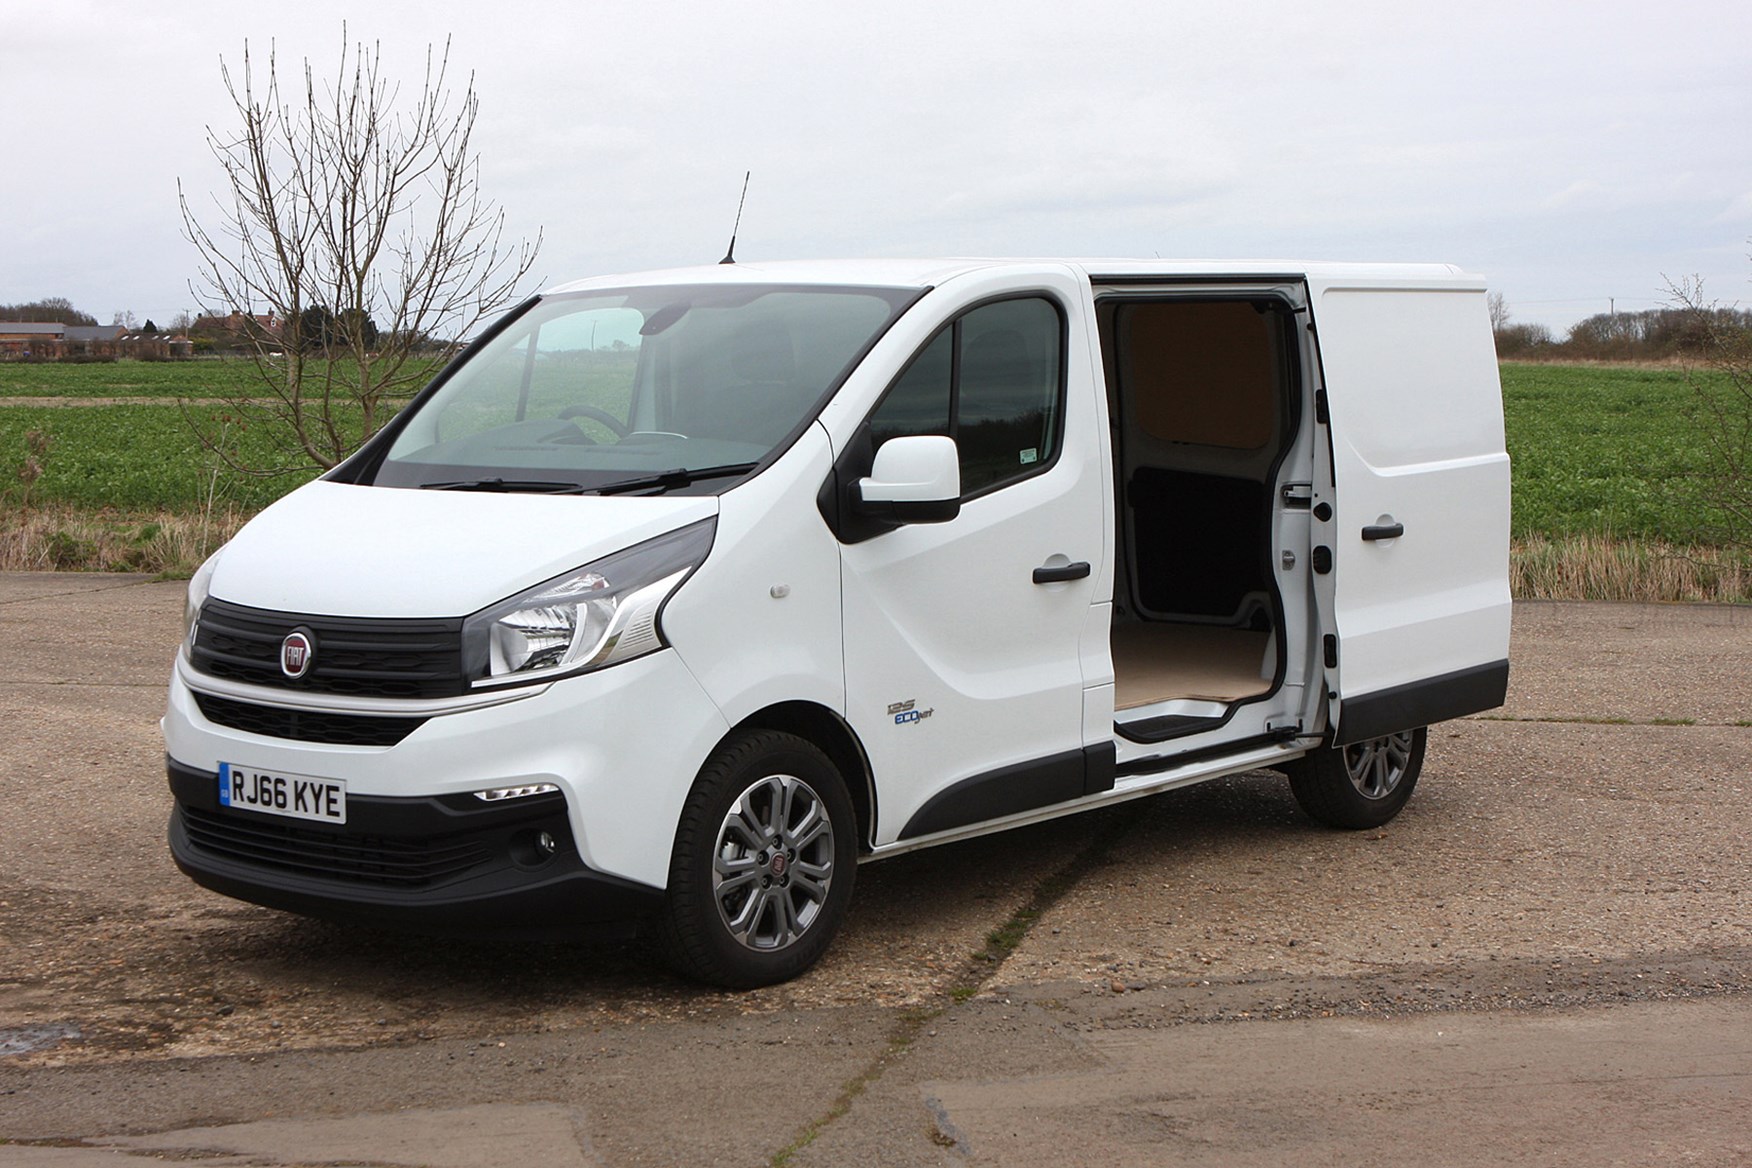 Fiat Talento 2016-on review on Parkers Vans - load area